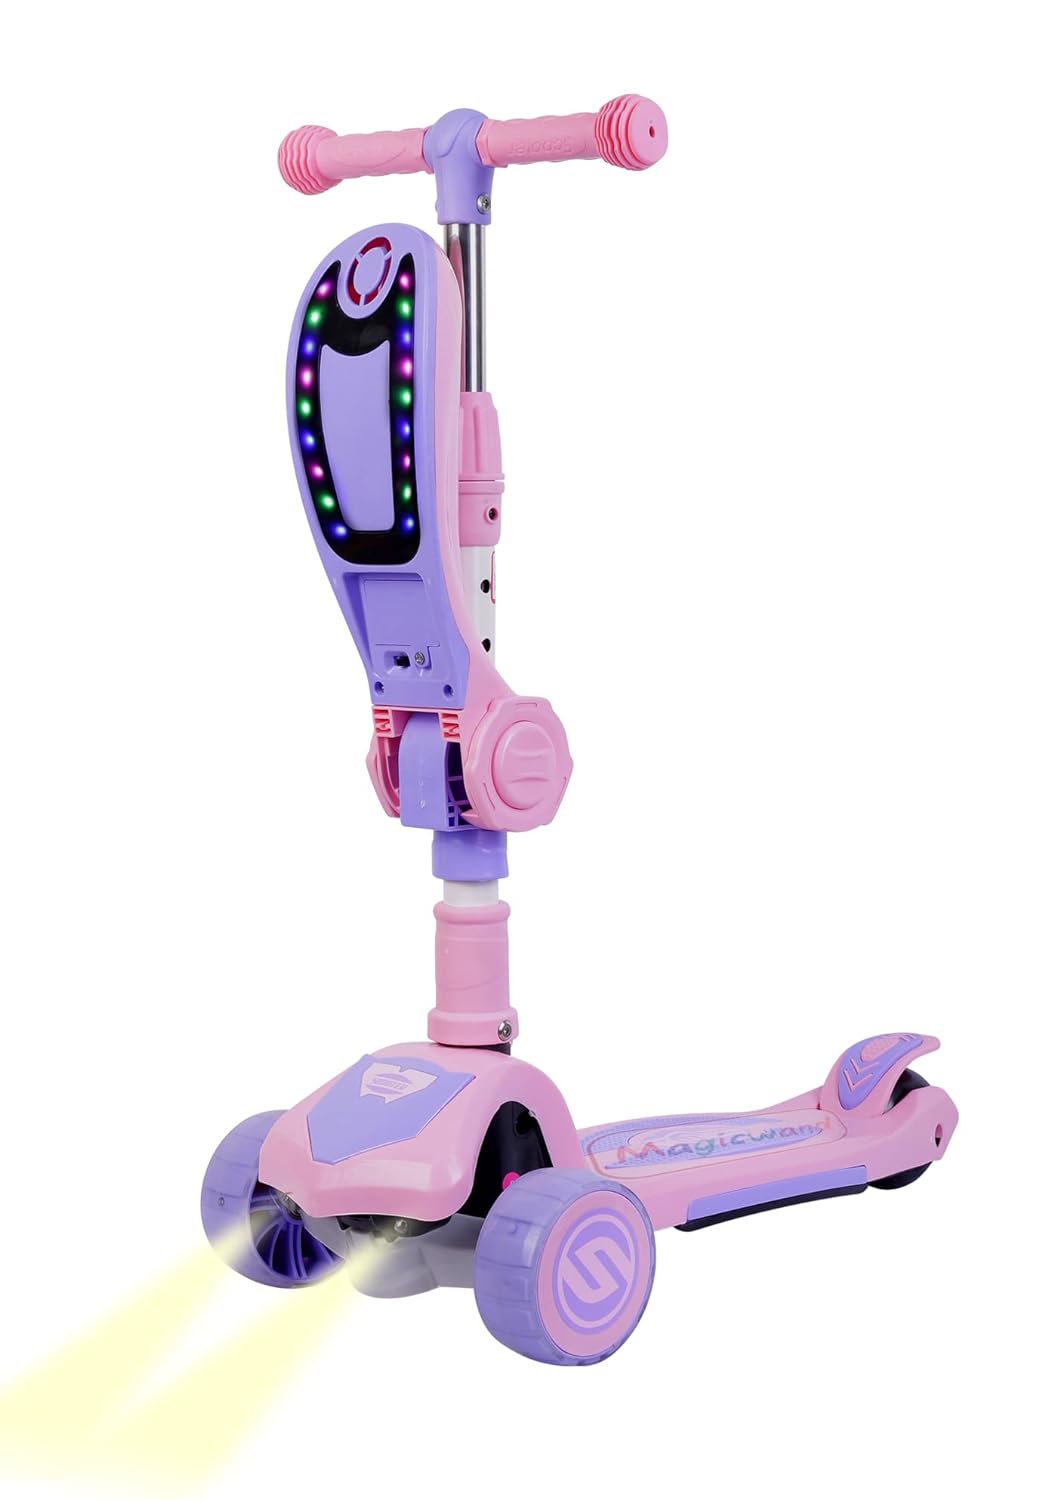 Magicwand Foldable 2-in-1 Sit & Stand Wide Platform Height Adjustable Kick Scooter for Kids with Foldable Seat,Lights & Music